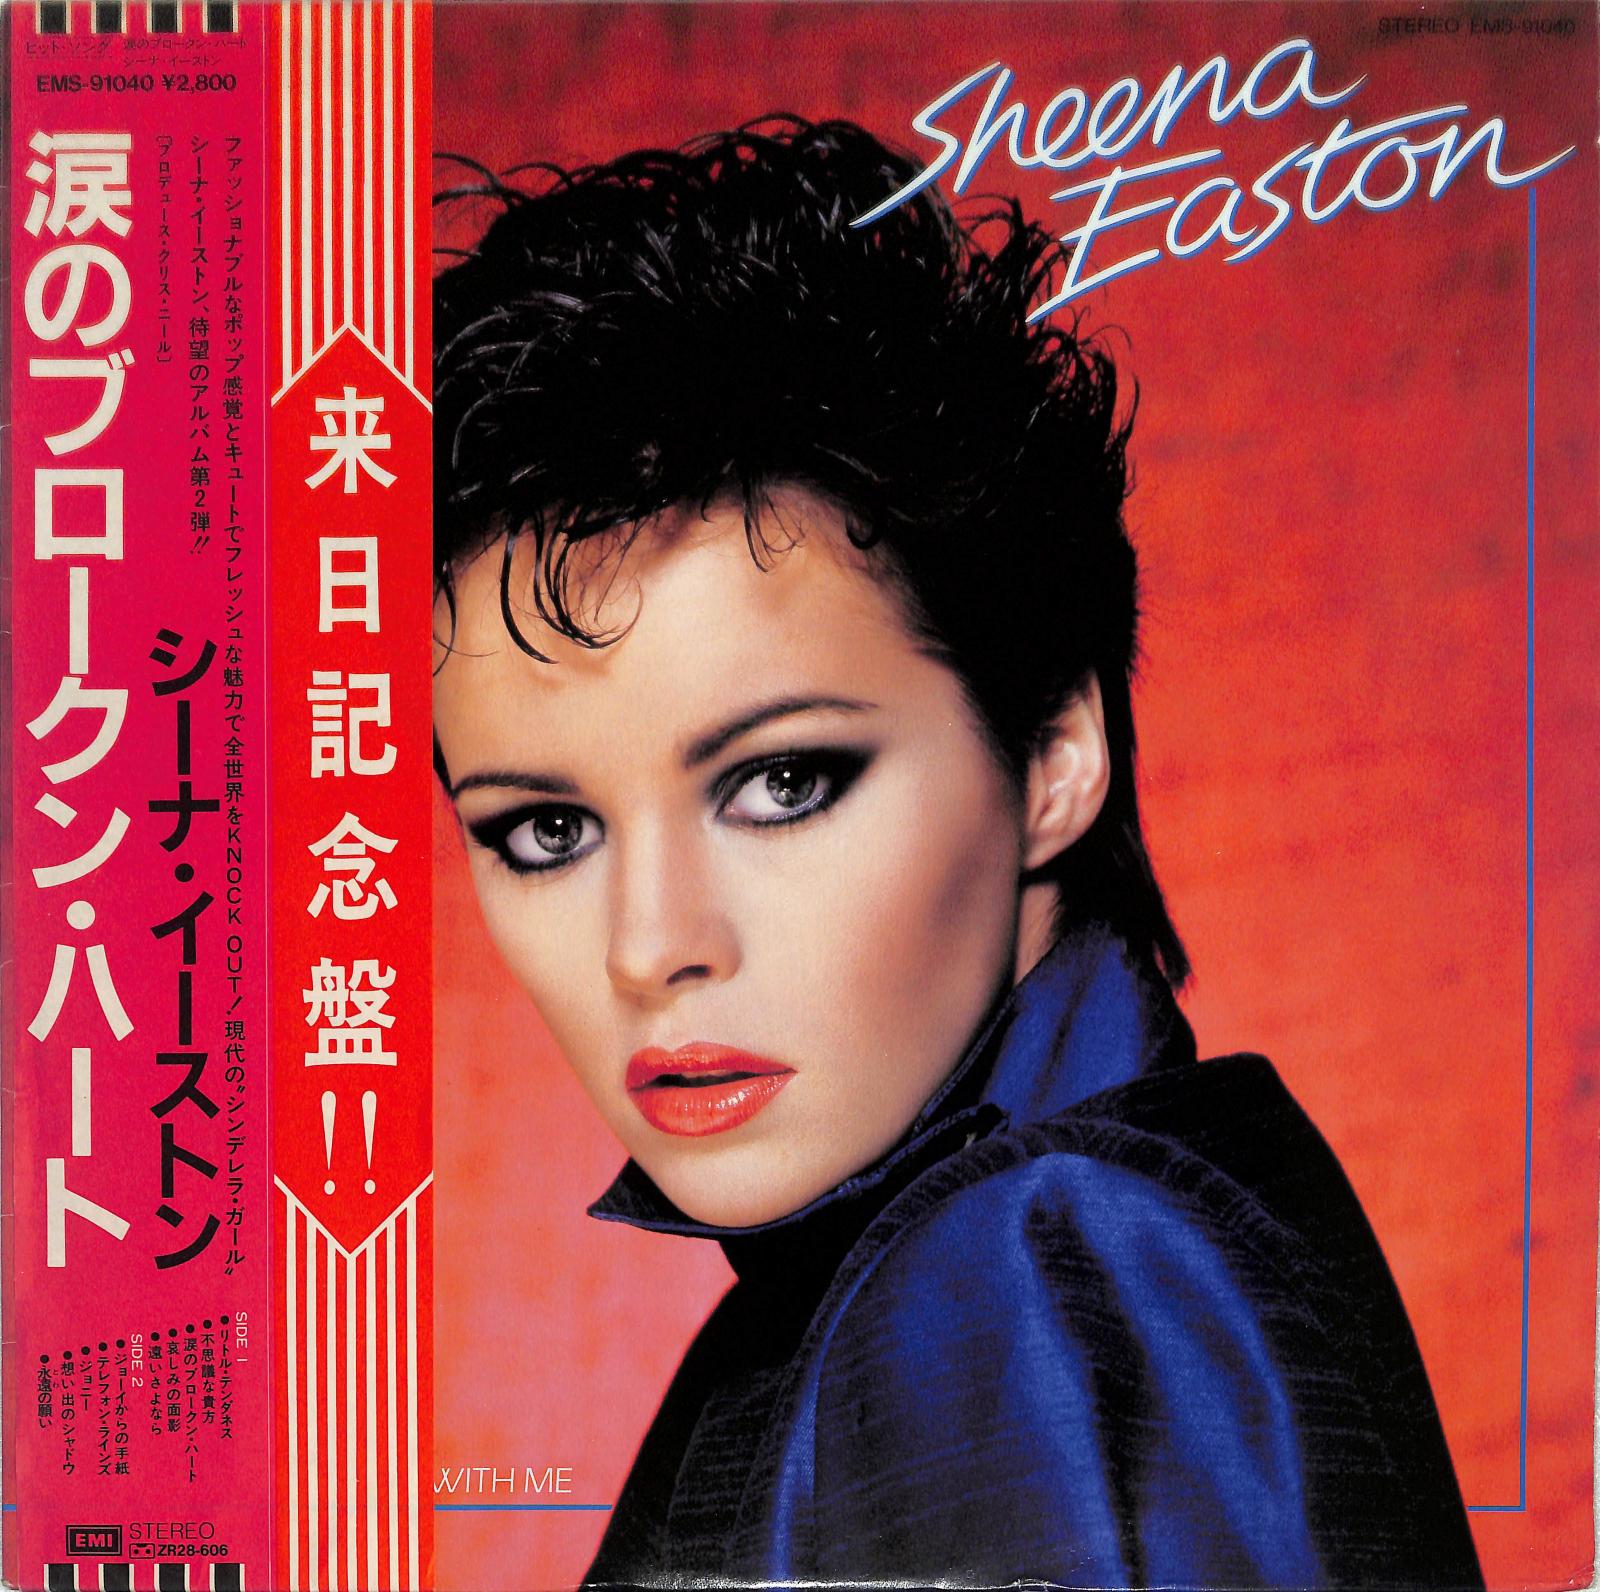 SHEENA EASTON - You Could Have Been With Me